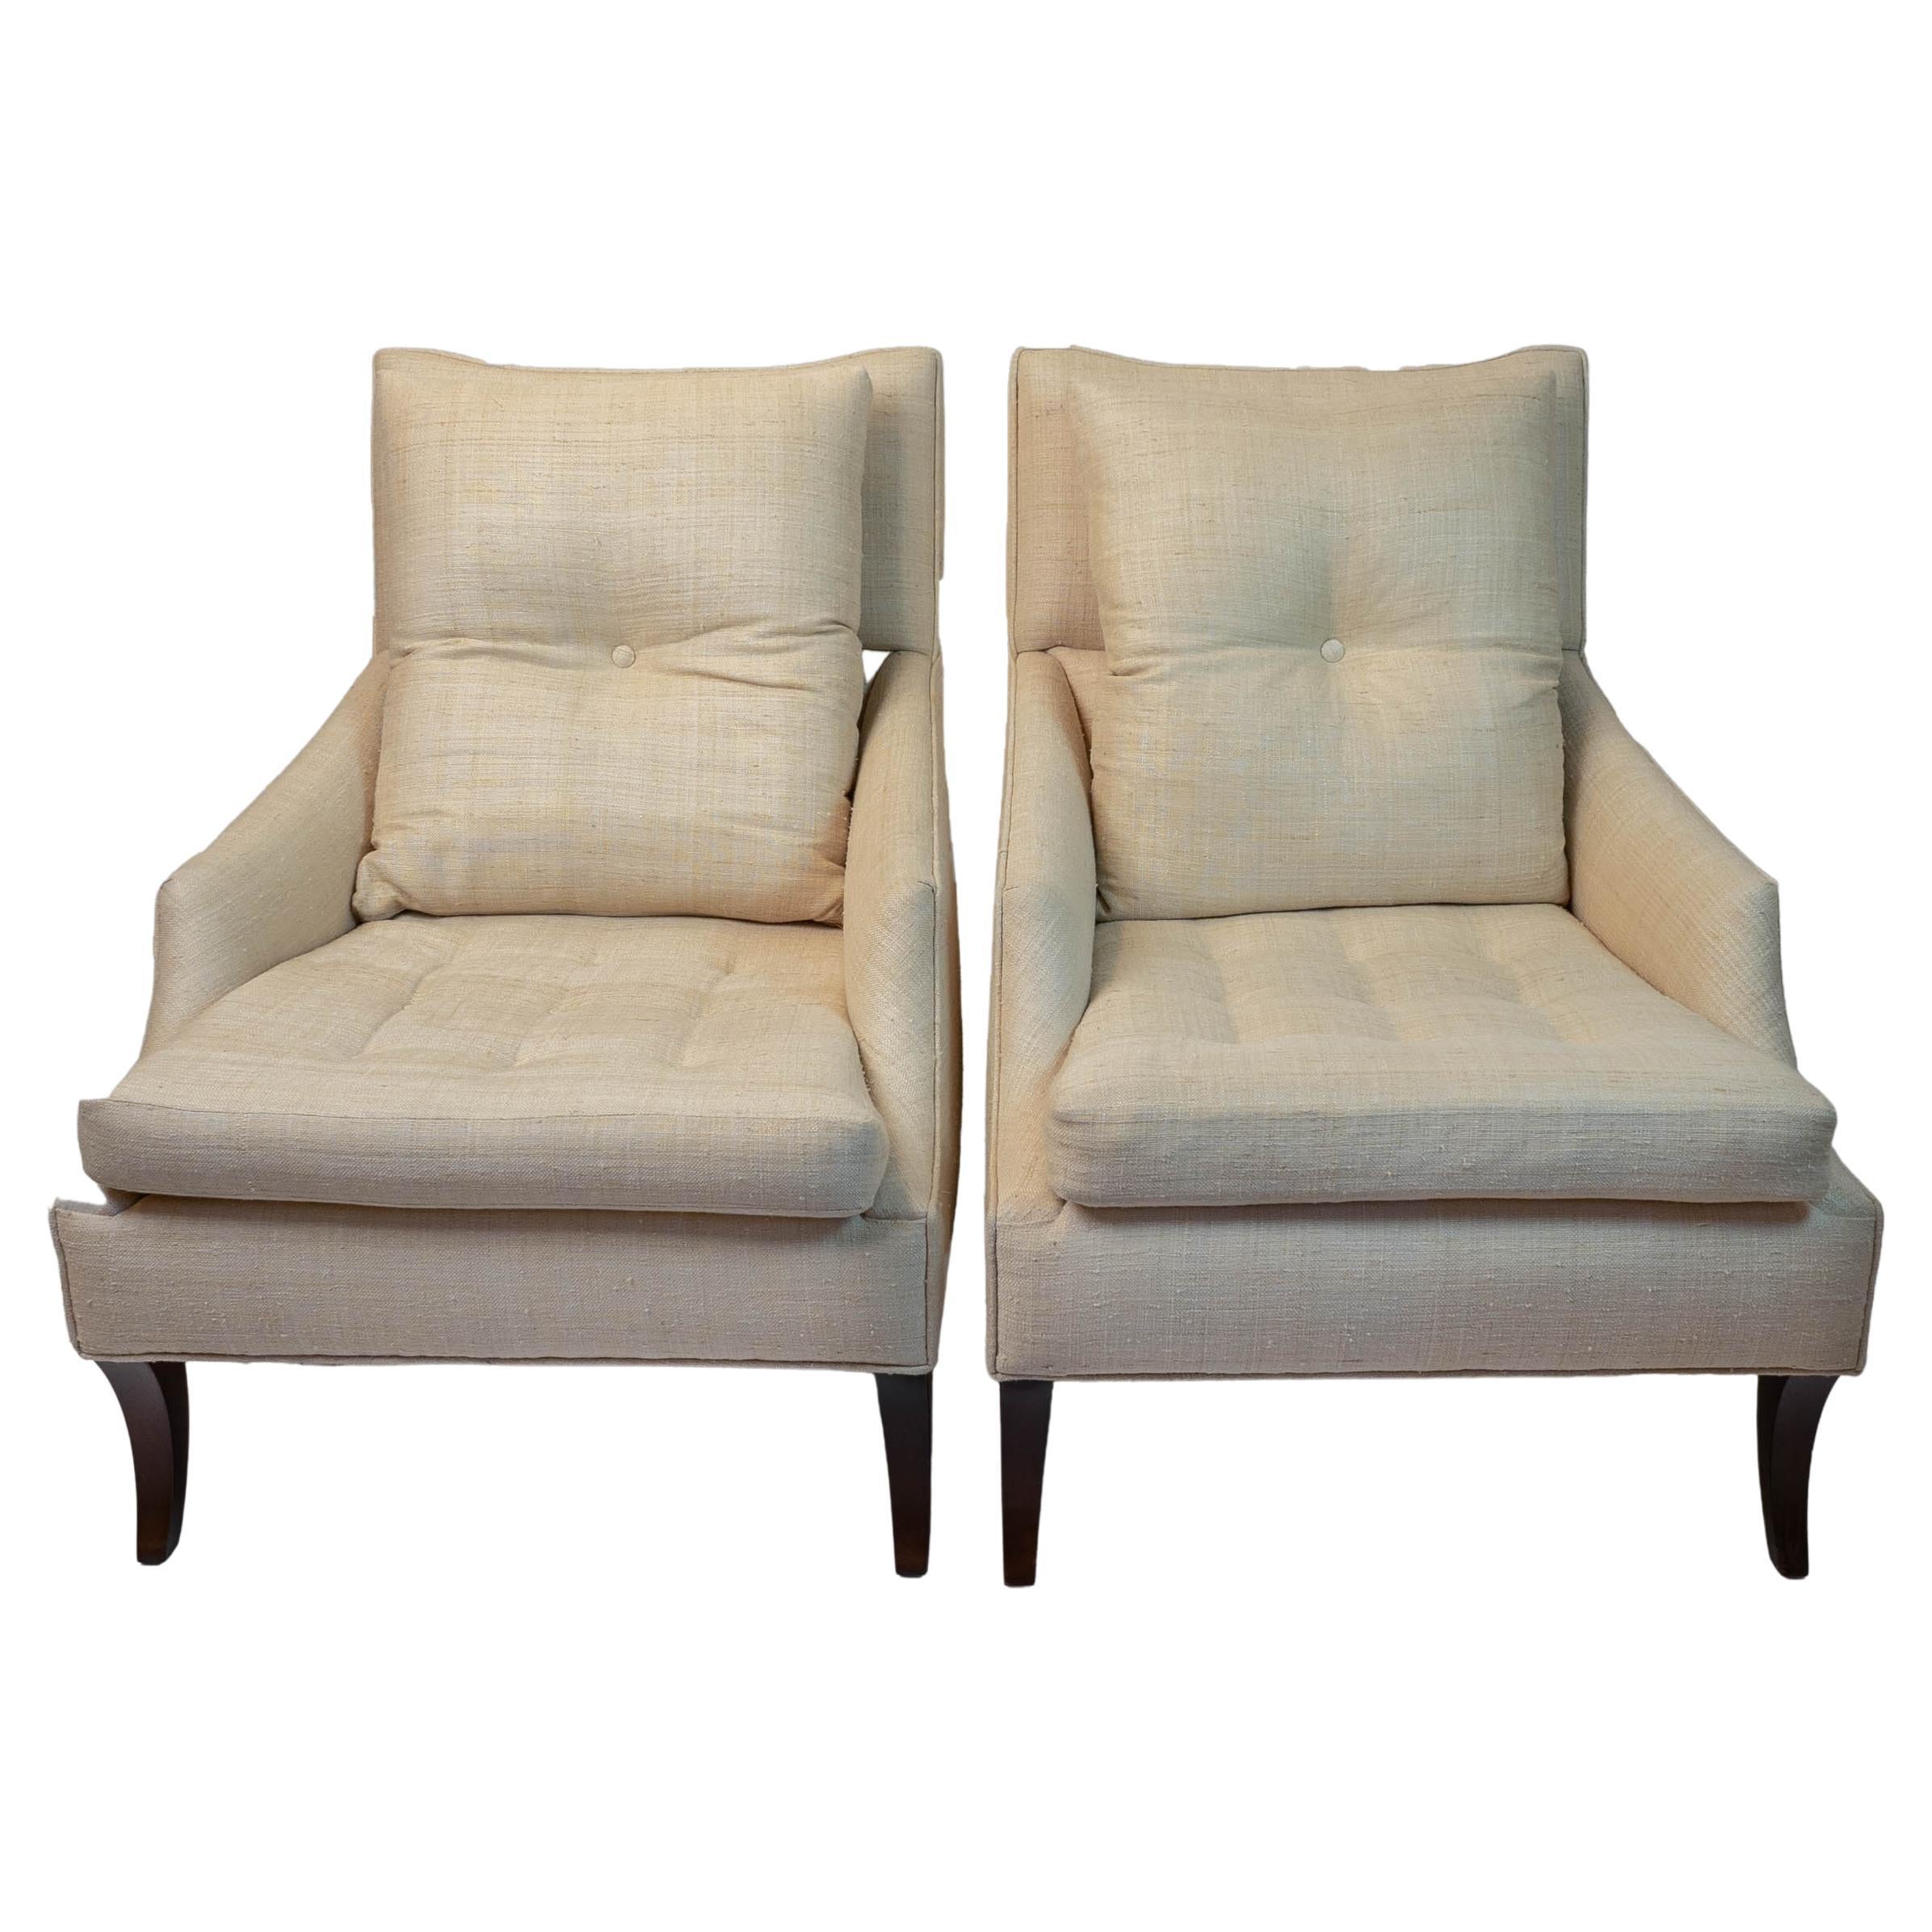 Pair of Custom Tufted Club Chairs with High-Grade Fabric, Original For Sale